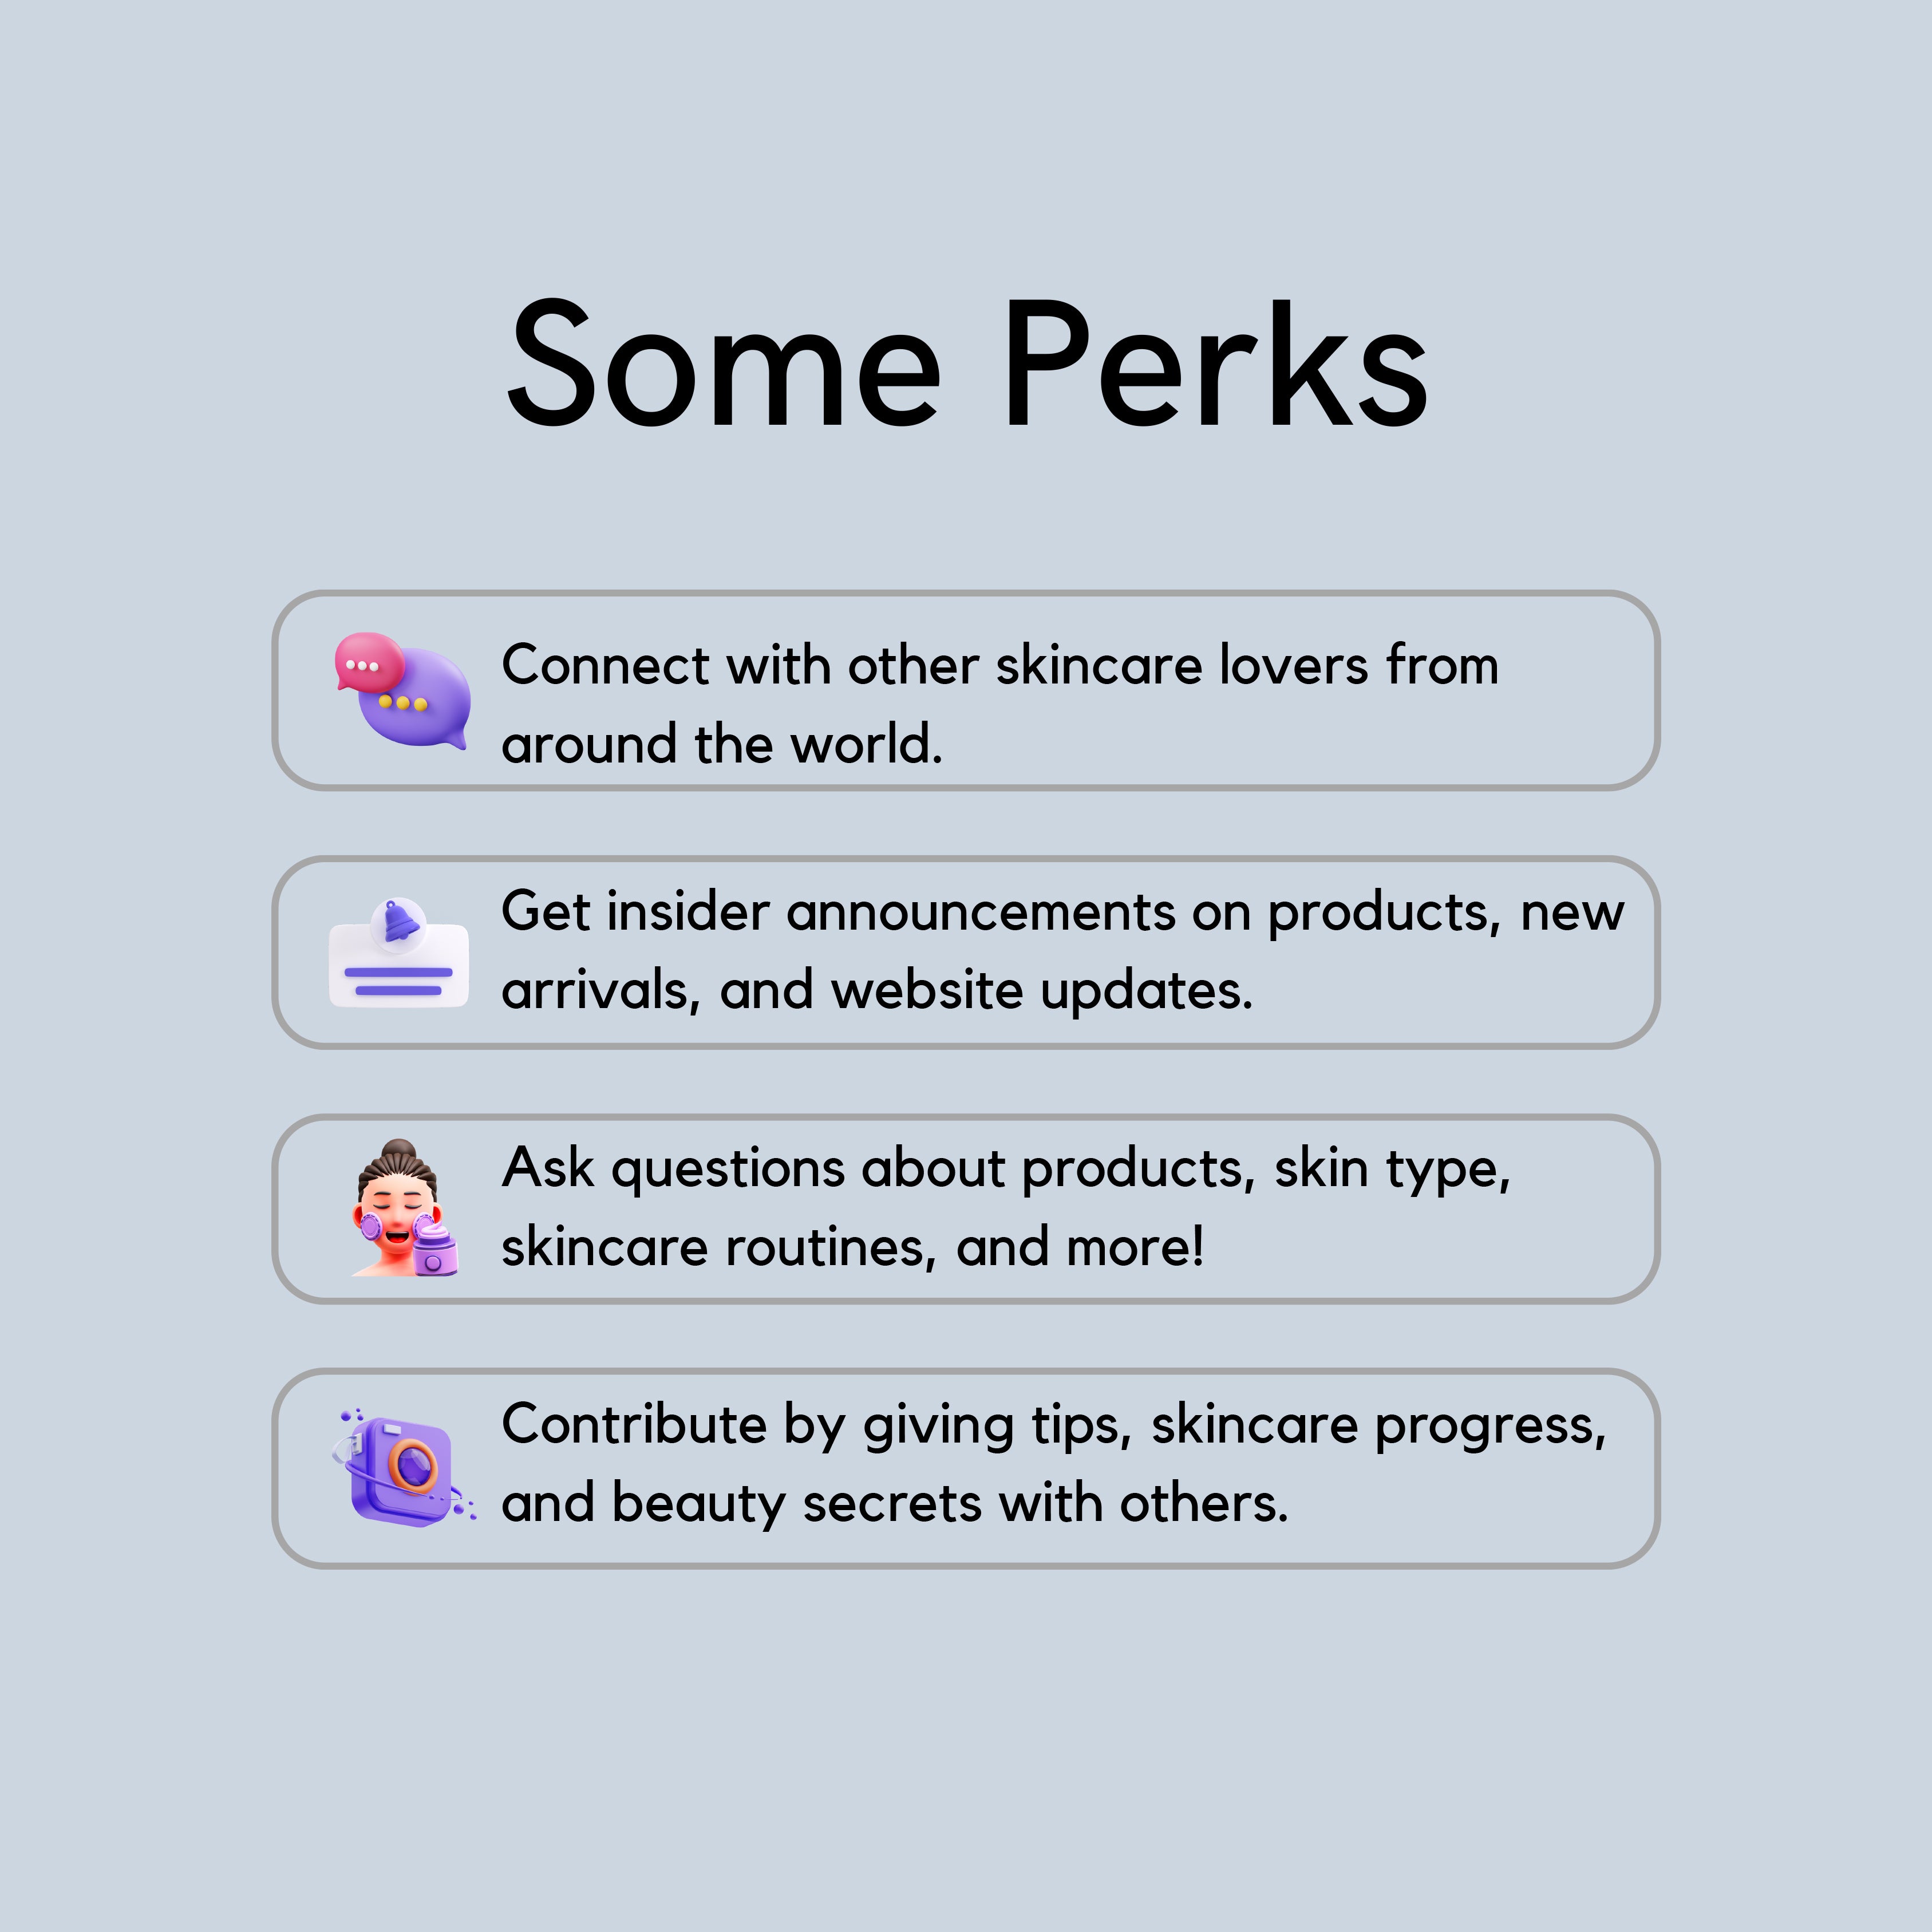 some perks, 1. connect with other skincare lovers from around the world. 2. get insider announcement on products, new arrivals, and website updates. 3. Ask questions about products, skin type, skincare routines, and more! 4. Contribute by giving tips, skincare progress, and beauty secrets with others.